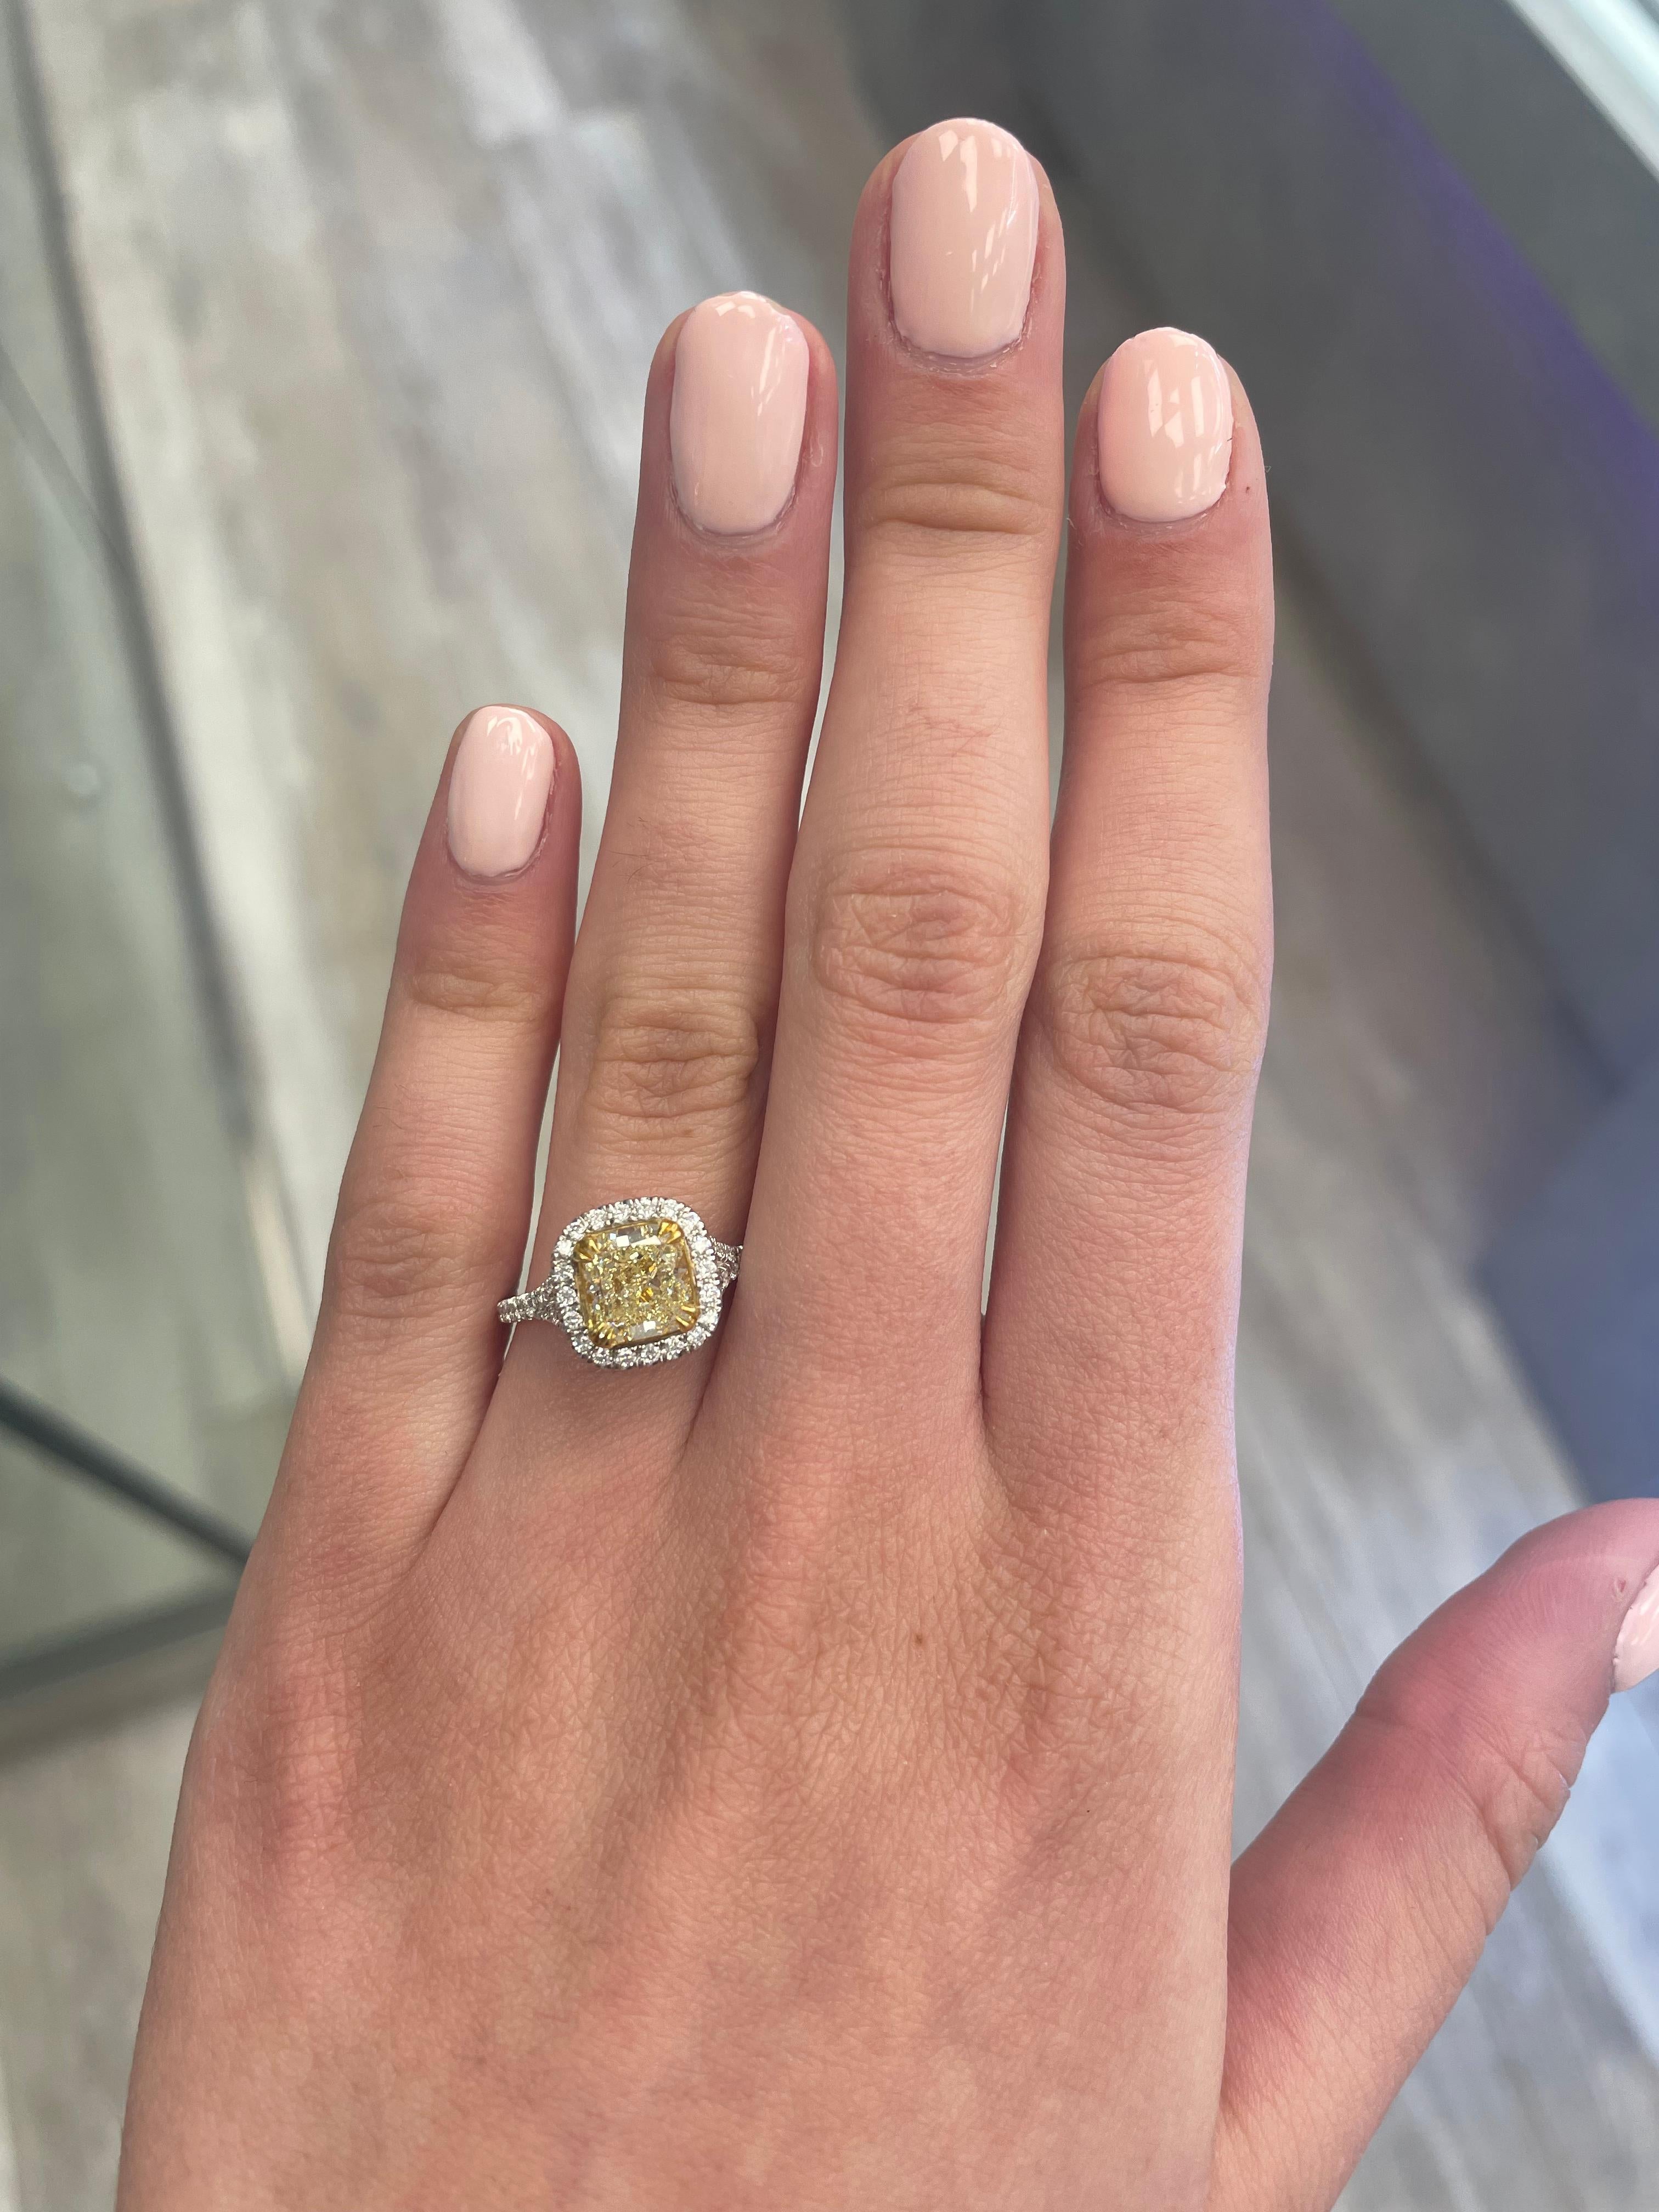 Stunning modern EGL certified yellow diamond with halo ring, two-tone 18k yellow and white gold, twisted shank. By Alexander Beverly Hills
2.48 carats total diamond weight.
2.07 carat cushion cut Fancy Intense Yellow color and VS1 clarity diamond,